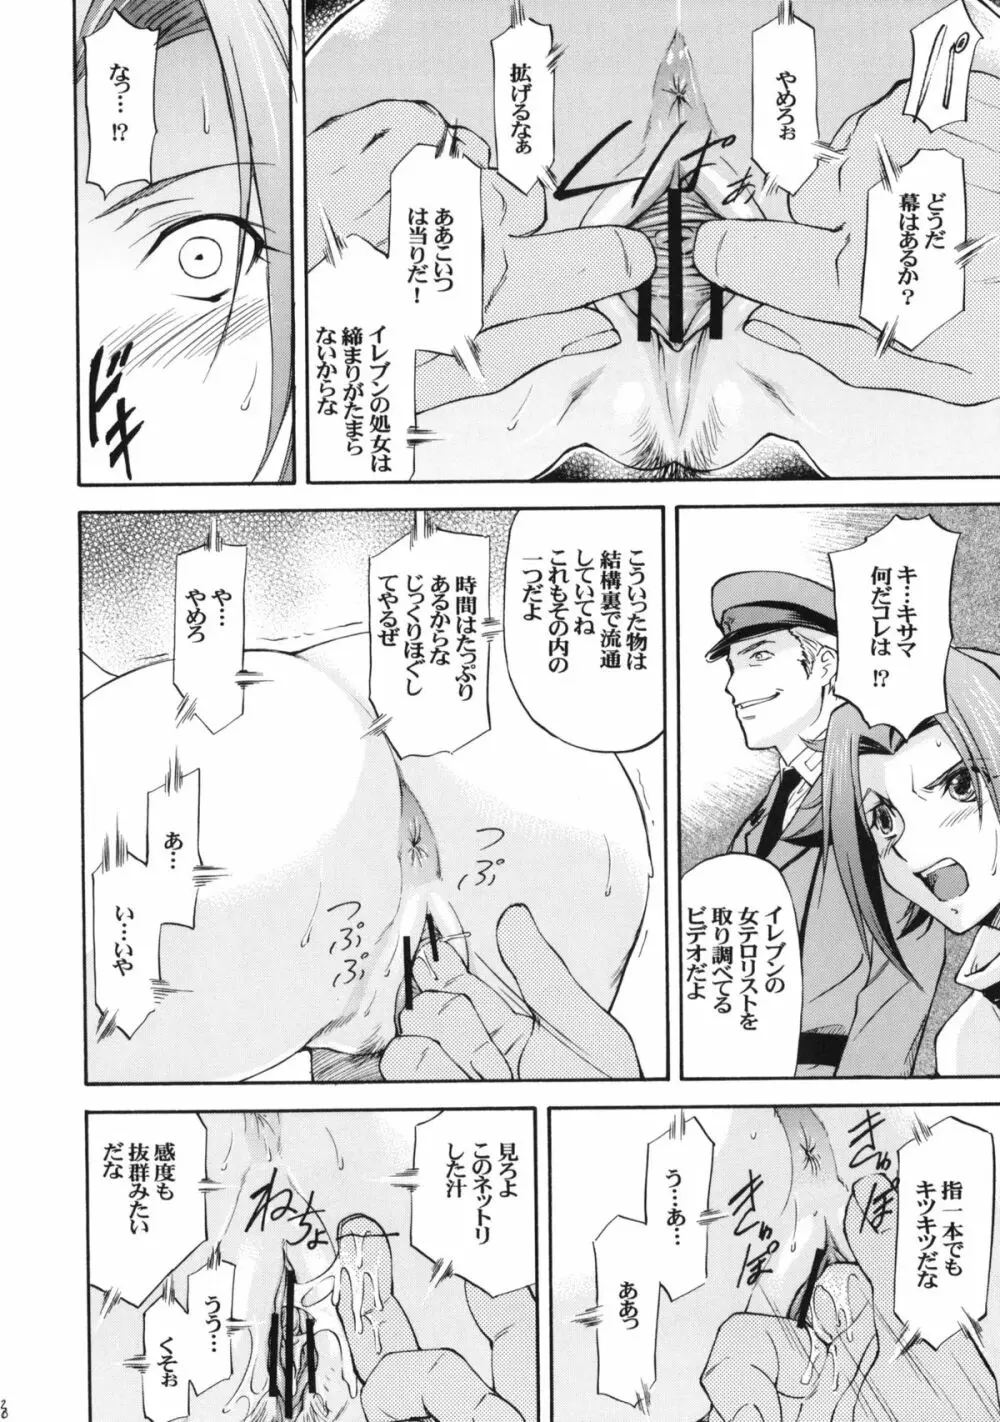 LeLeぱっぱ Vol.16 Re;Re; - page21